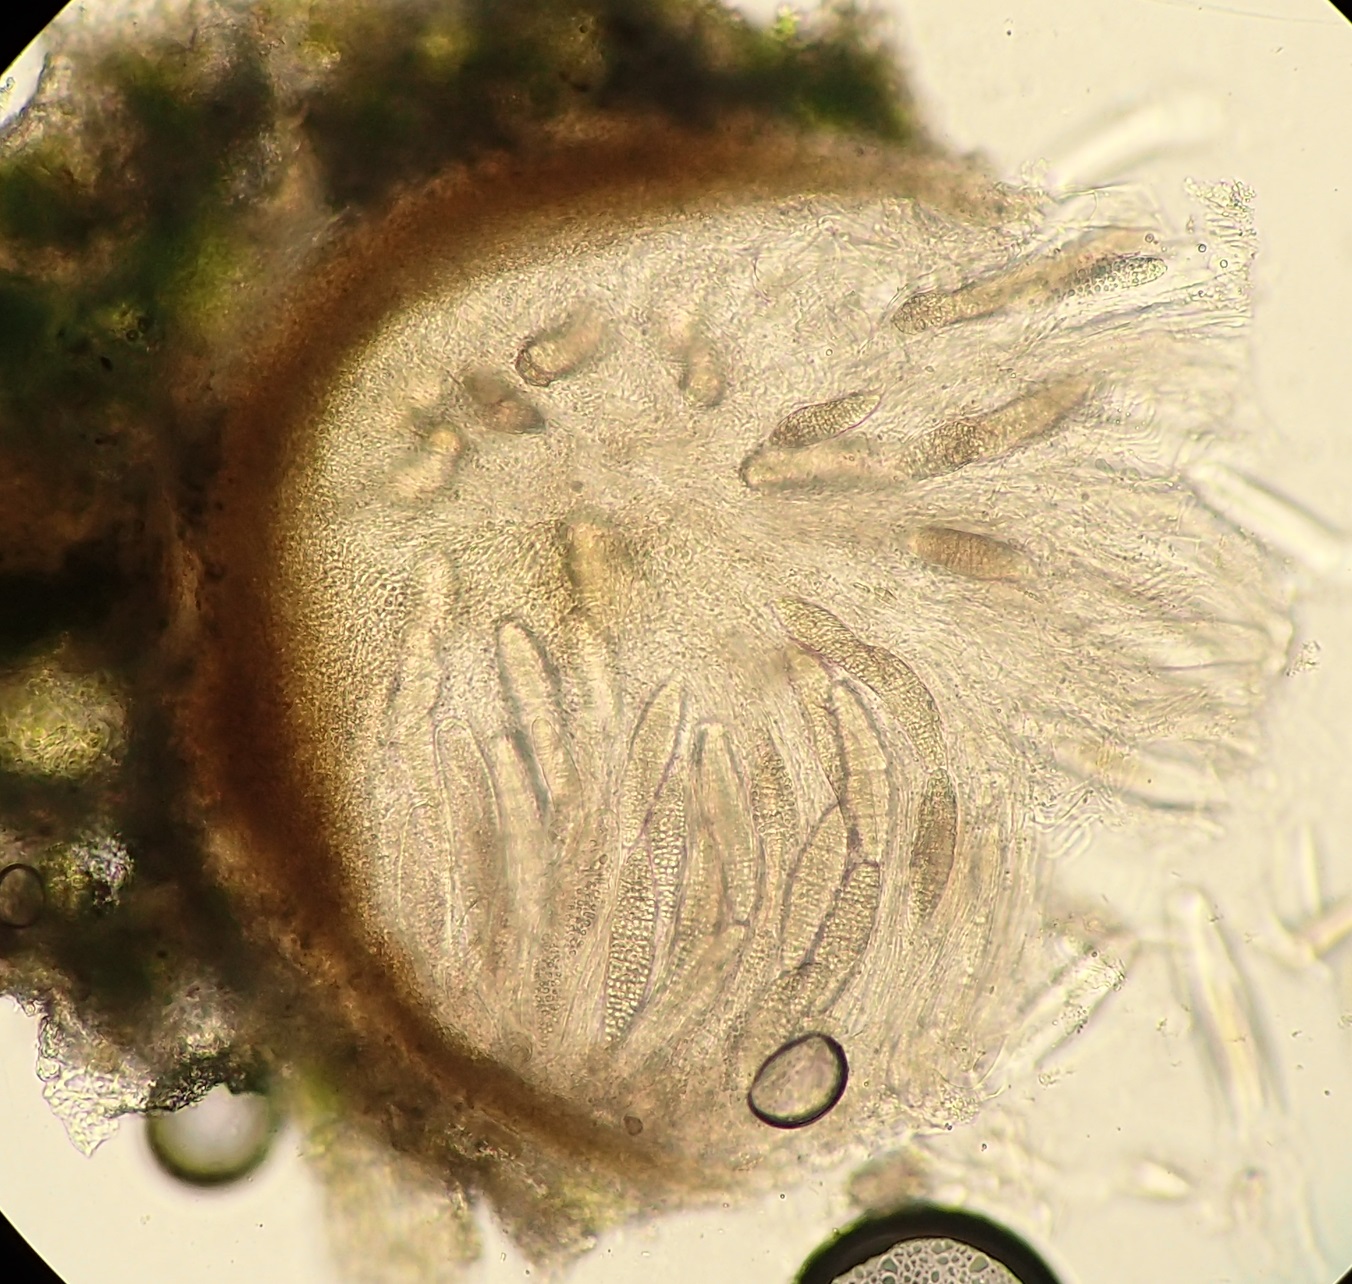 Thelenella muscorum one perithecium with large muriform spores